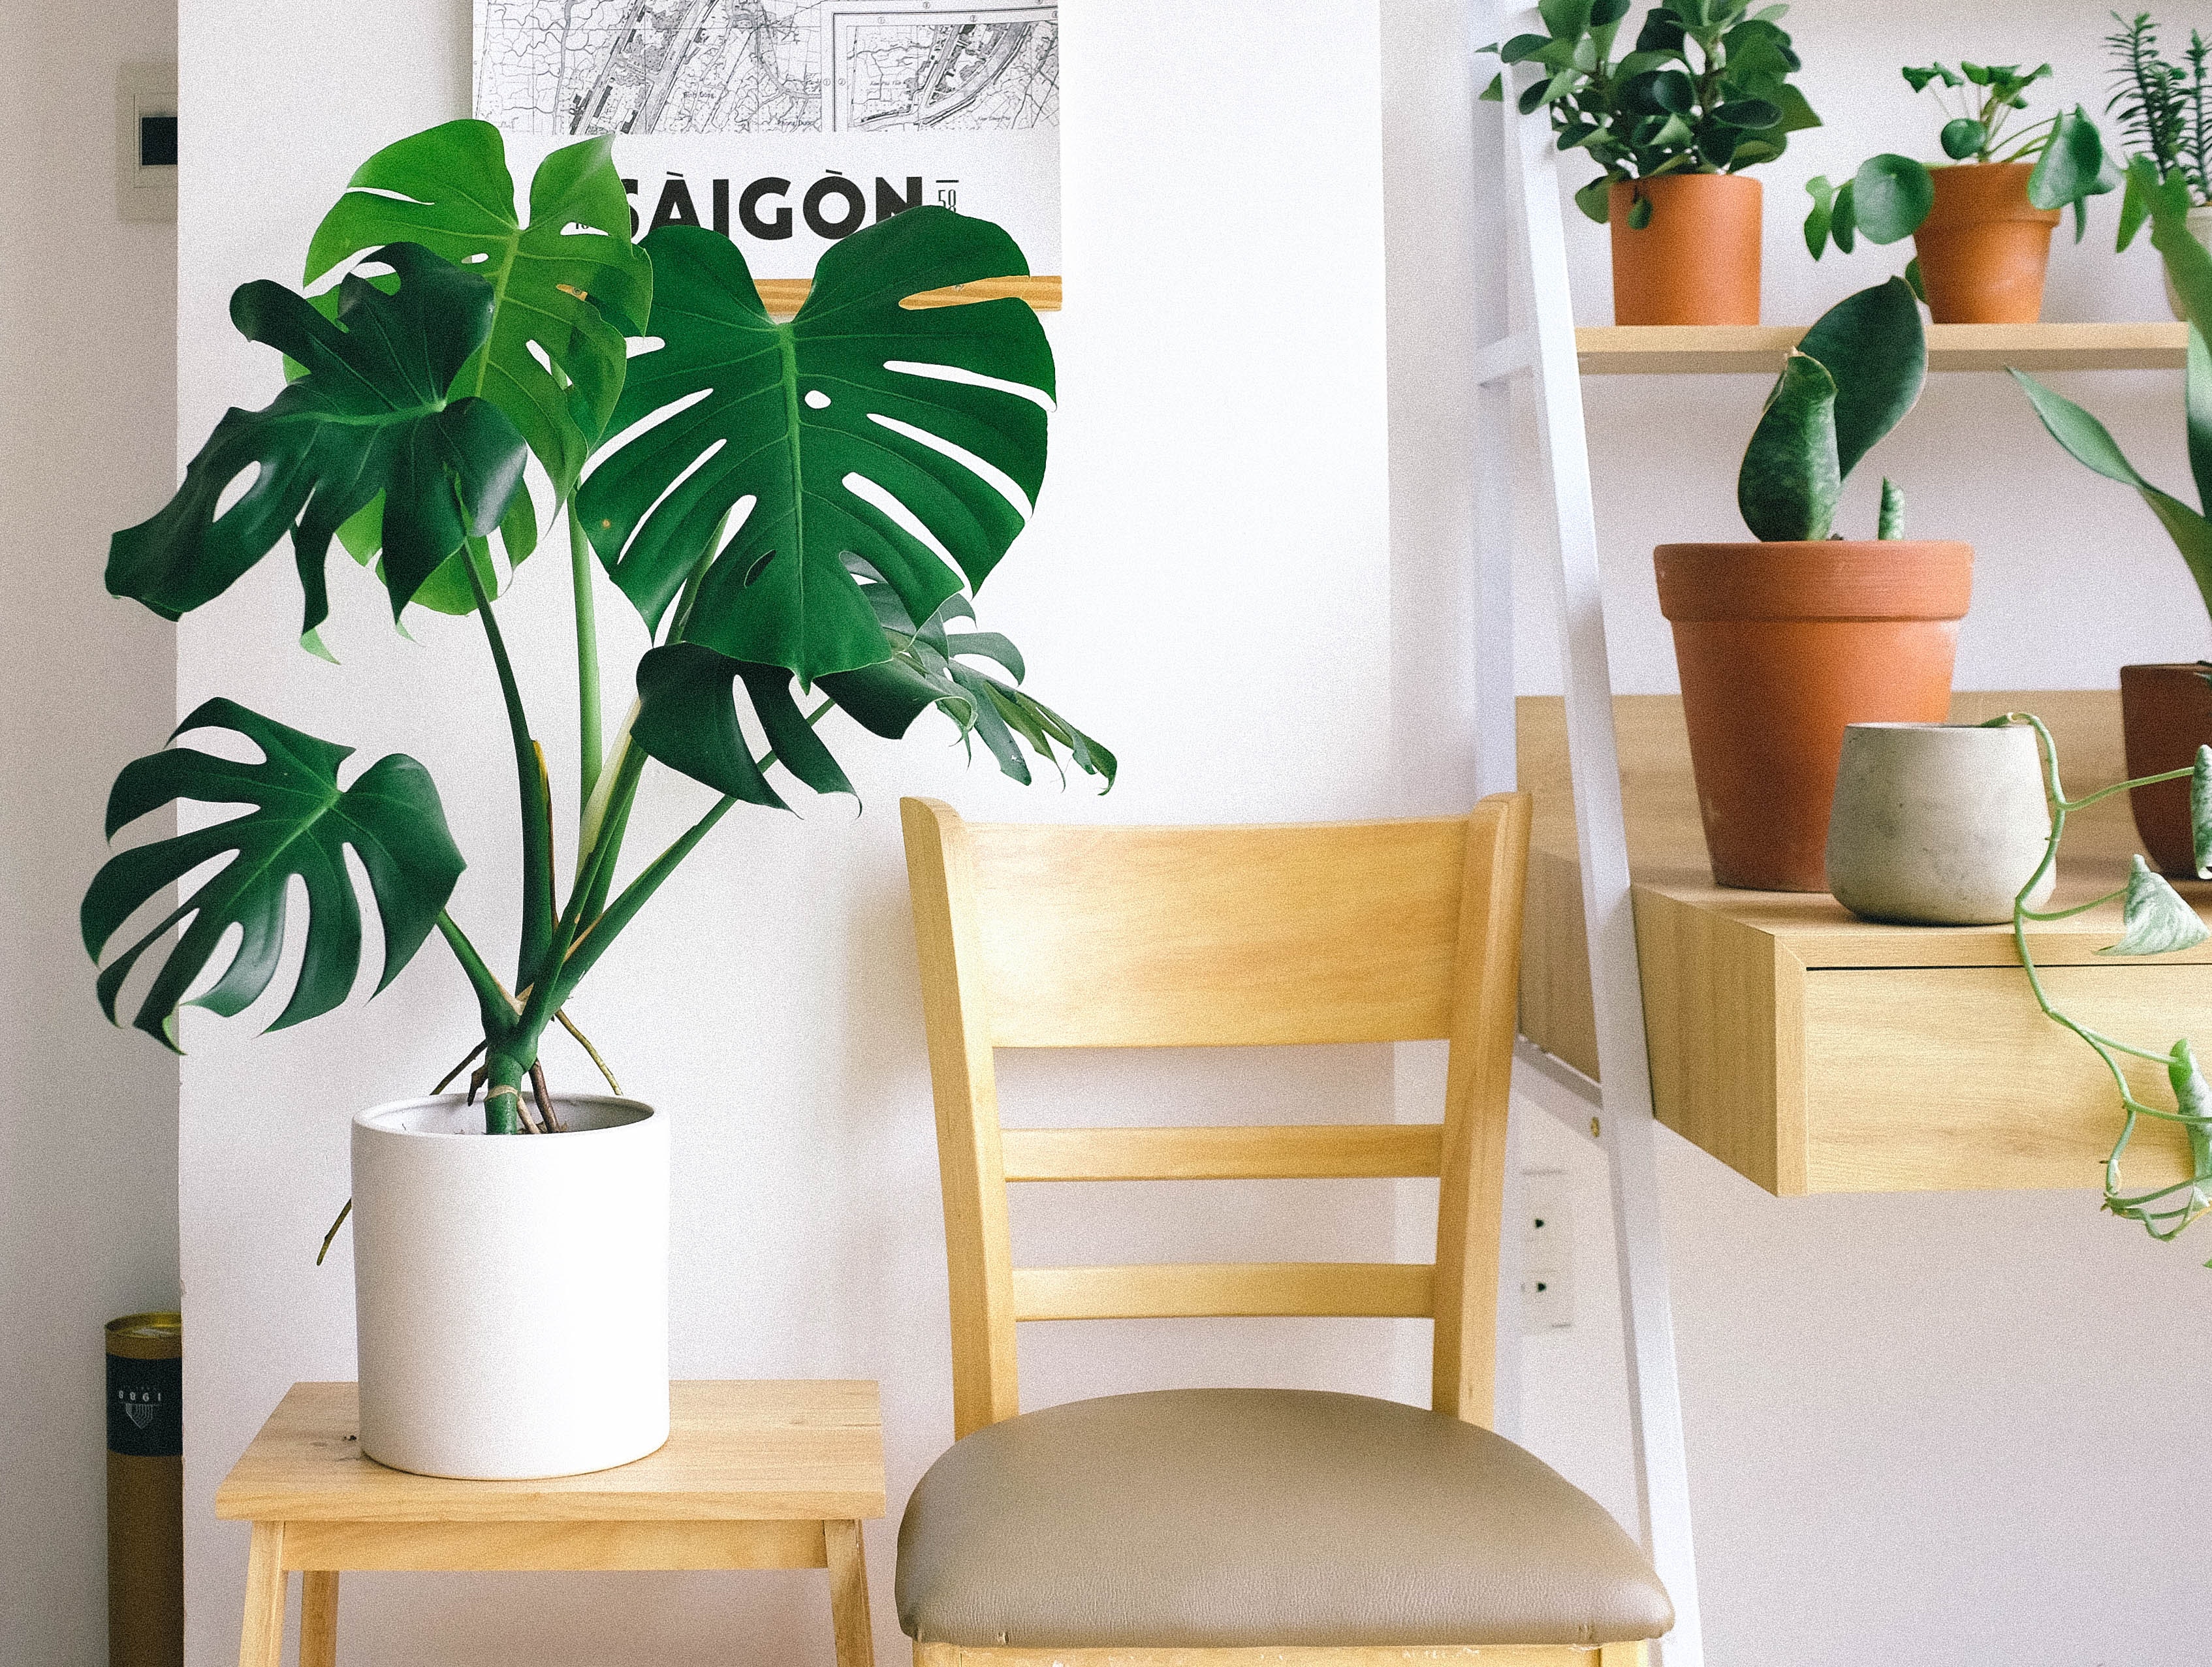 How to Decorate With Faux Plants - How to Mix Real and Faux Plants